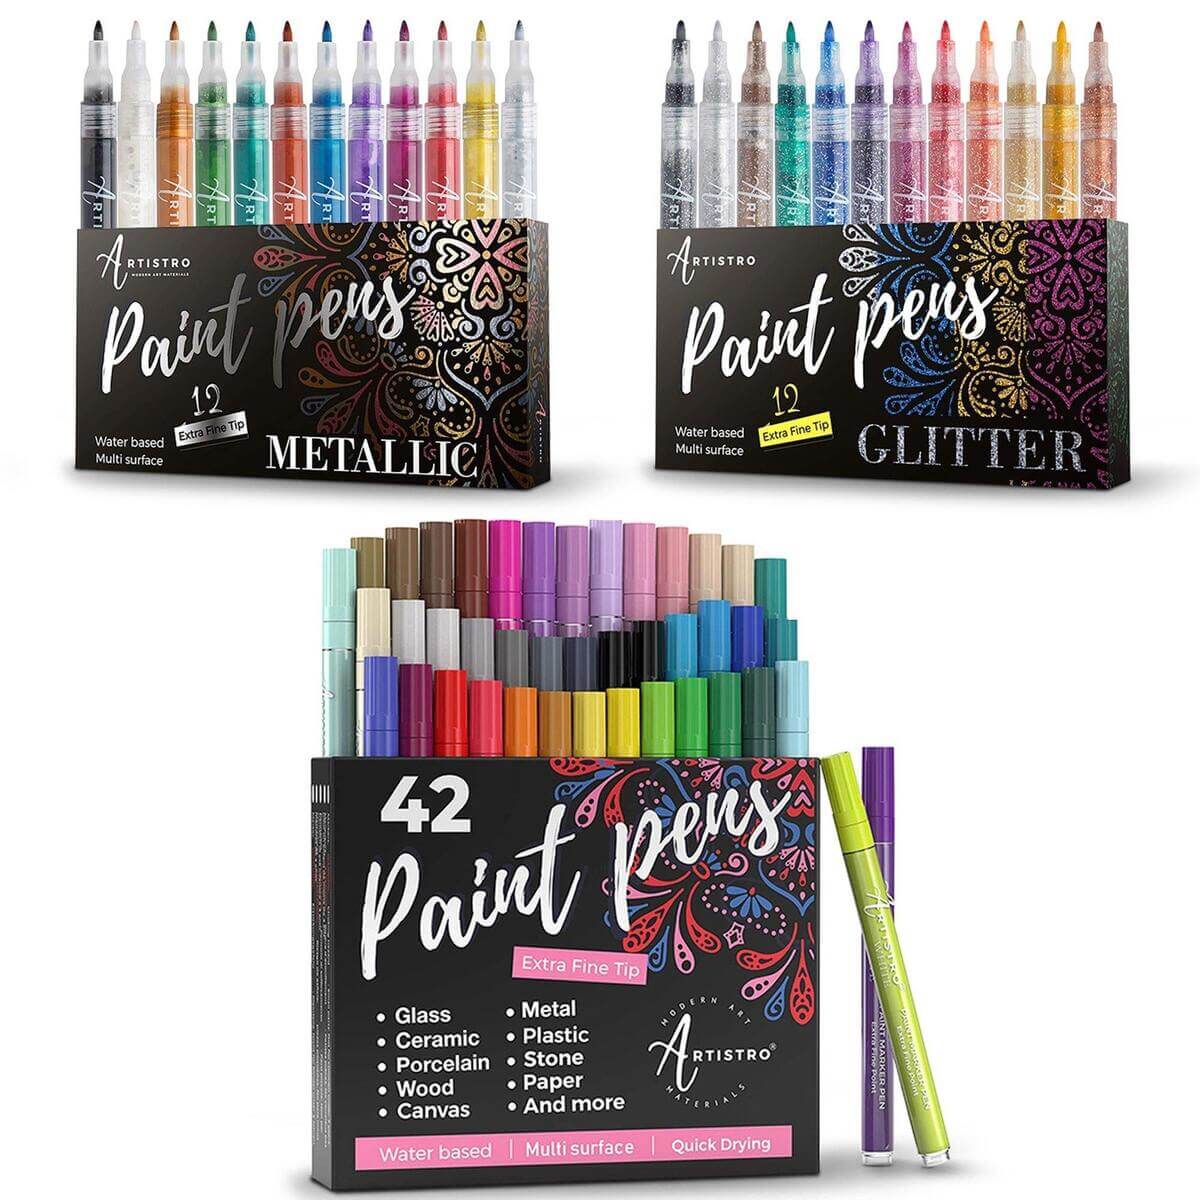 21 Black and White Acrylic Paint Markers Paint Pens Set 0.7mm Extra Fine and 3.0mm Medium Tip for Rock Painting Canvas Mugs Metal Glass Paint